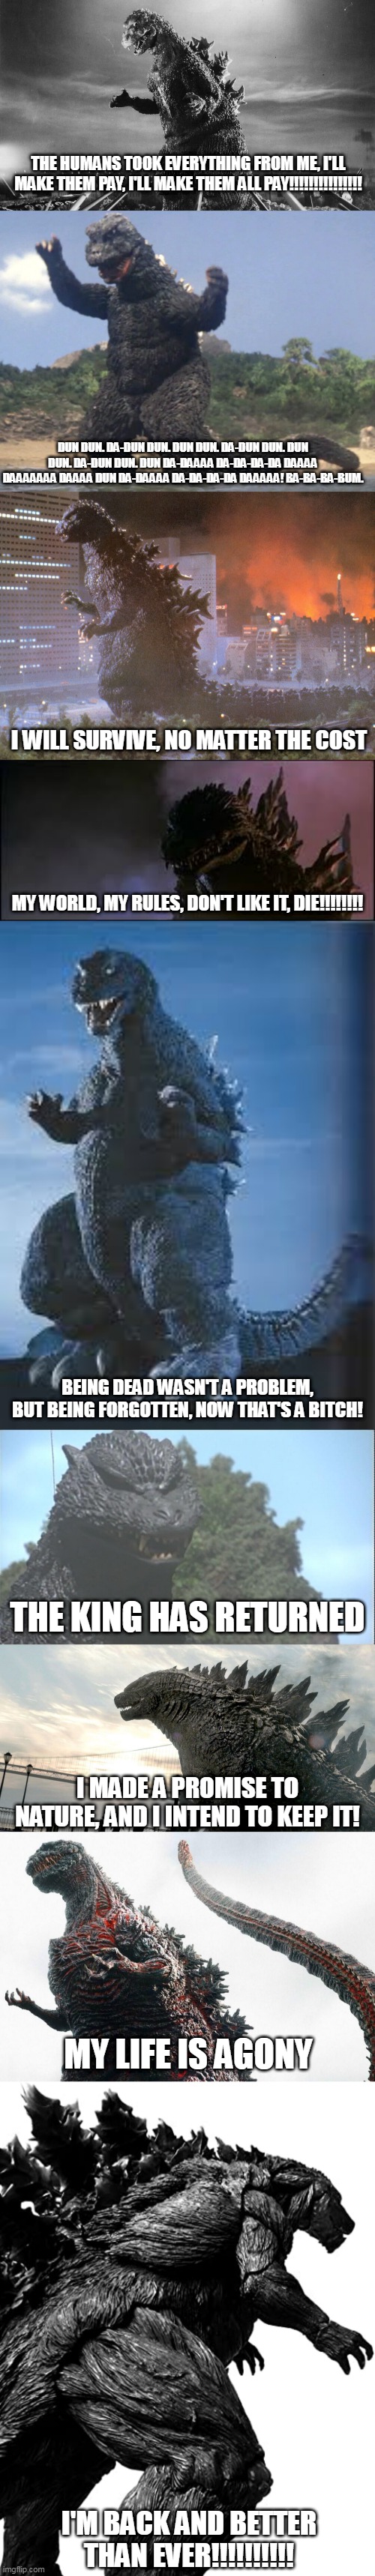 Godzilla Personalities In A Nutshell |  THE HUMANS TOOK EVERYTHING FROM ME, I'LL MAKE THEM PAY, I'LL MAKE THEM ALL PAY!!!!!!!!!!!!!!! DUN DUN. DA-DUN DUN. DUN DUN. DA-DUN DUN. DUN DUN. DA-DUN DUN. DUN DA-DAAAA DA-DA-DA-DA DAAAA DAAAAAAA DAAAA DUN DA-DAAAA DA-DA-DA-DA DAAAAA! BA-BA-BA-BUM. I WILL SURVIVE, NO MATTER THE COST; MY WORLD, MY RULES, DON'T LIKE IT, DIE!!!!!!!! BEING DEAD WASN'T A PROBLEM, BUT BEING FORGOTTEN, NOW THAT'S A BITCH! THE KING HAS RETURNED; I MADE A PROMISE TO NATURE, AND I INTEND TO KEEP IT! MY LIFE IS AGONY; I'M BACK AND BETTER THAN EVER!!!!!!!!!! | image tagged in godzilla,personality,emotion,character,description,nutshell | made w/ Imgflip meme maker